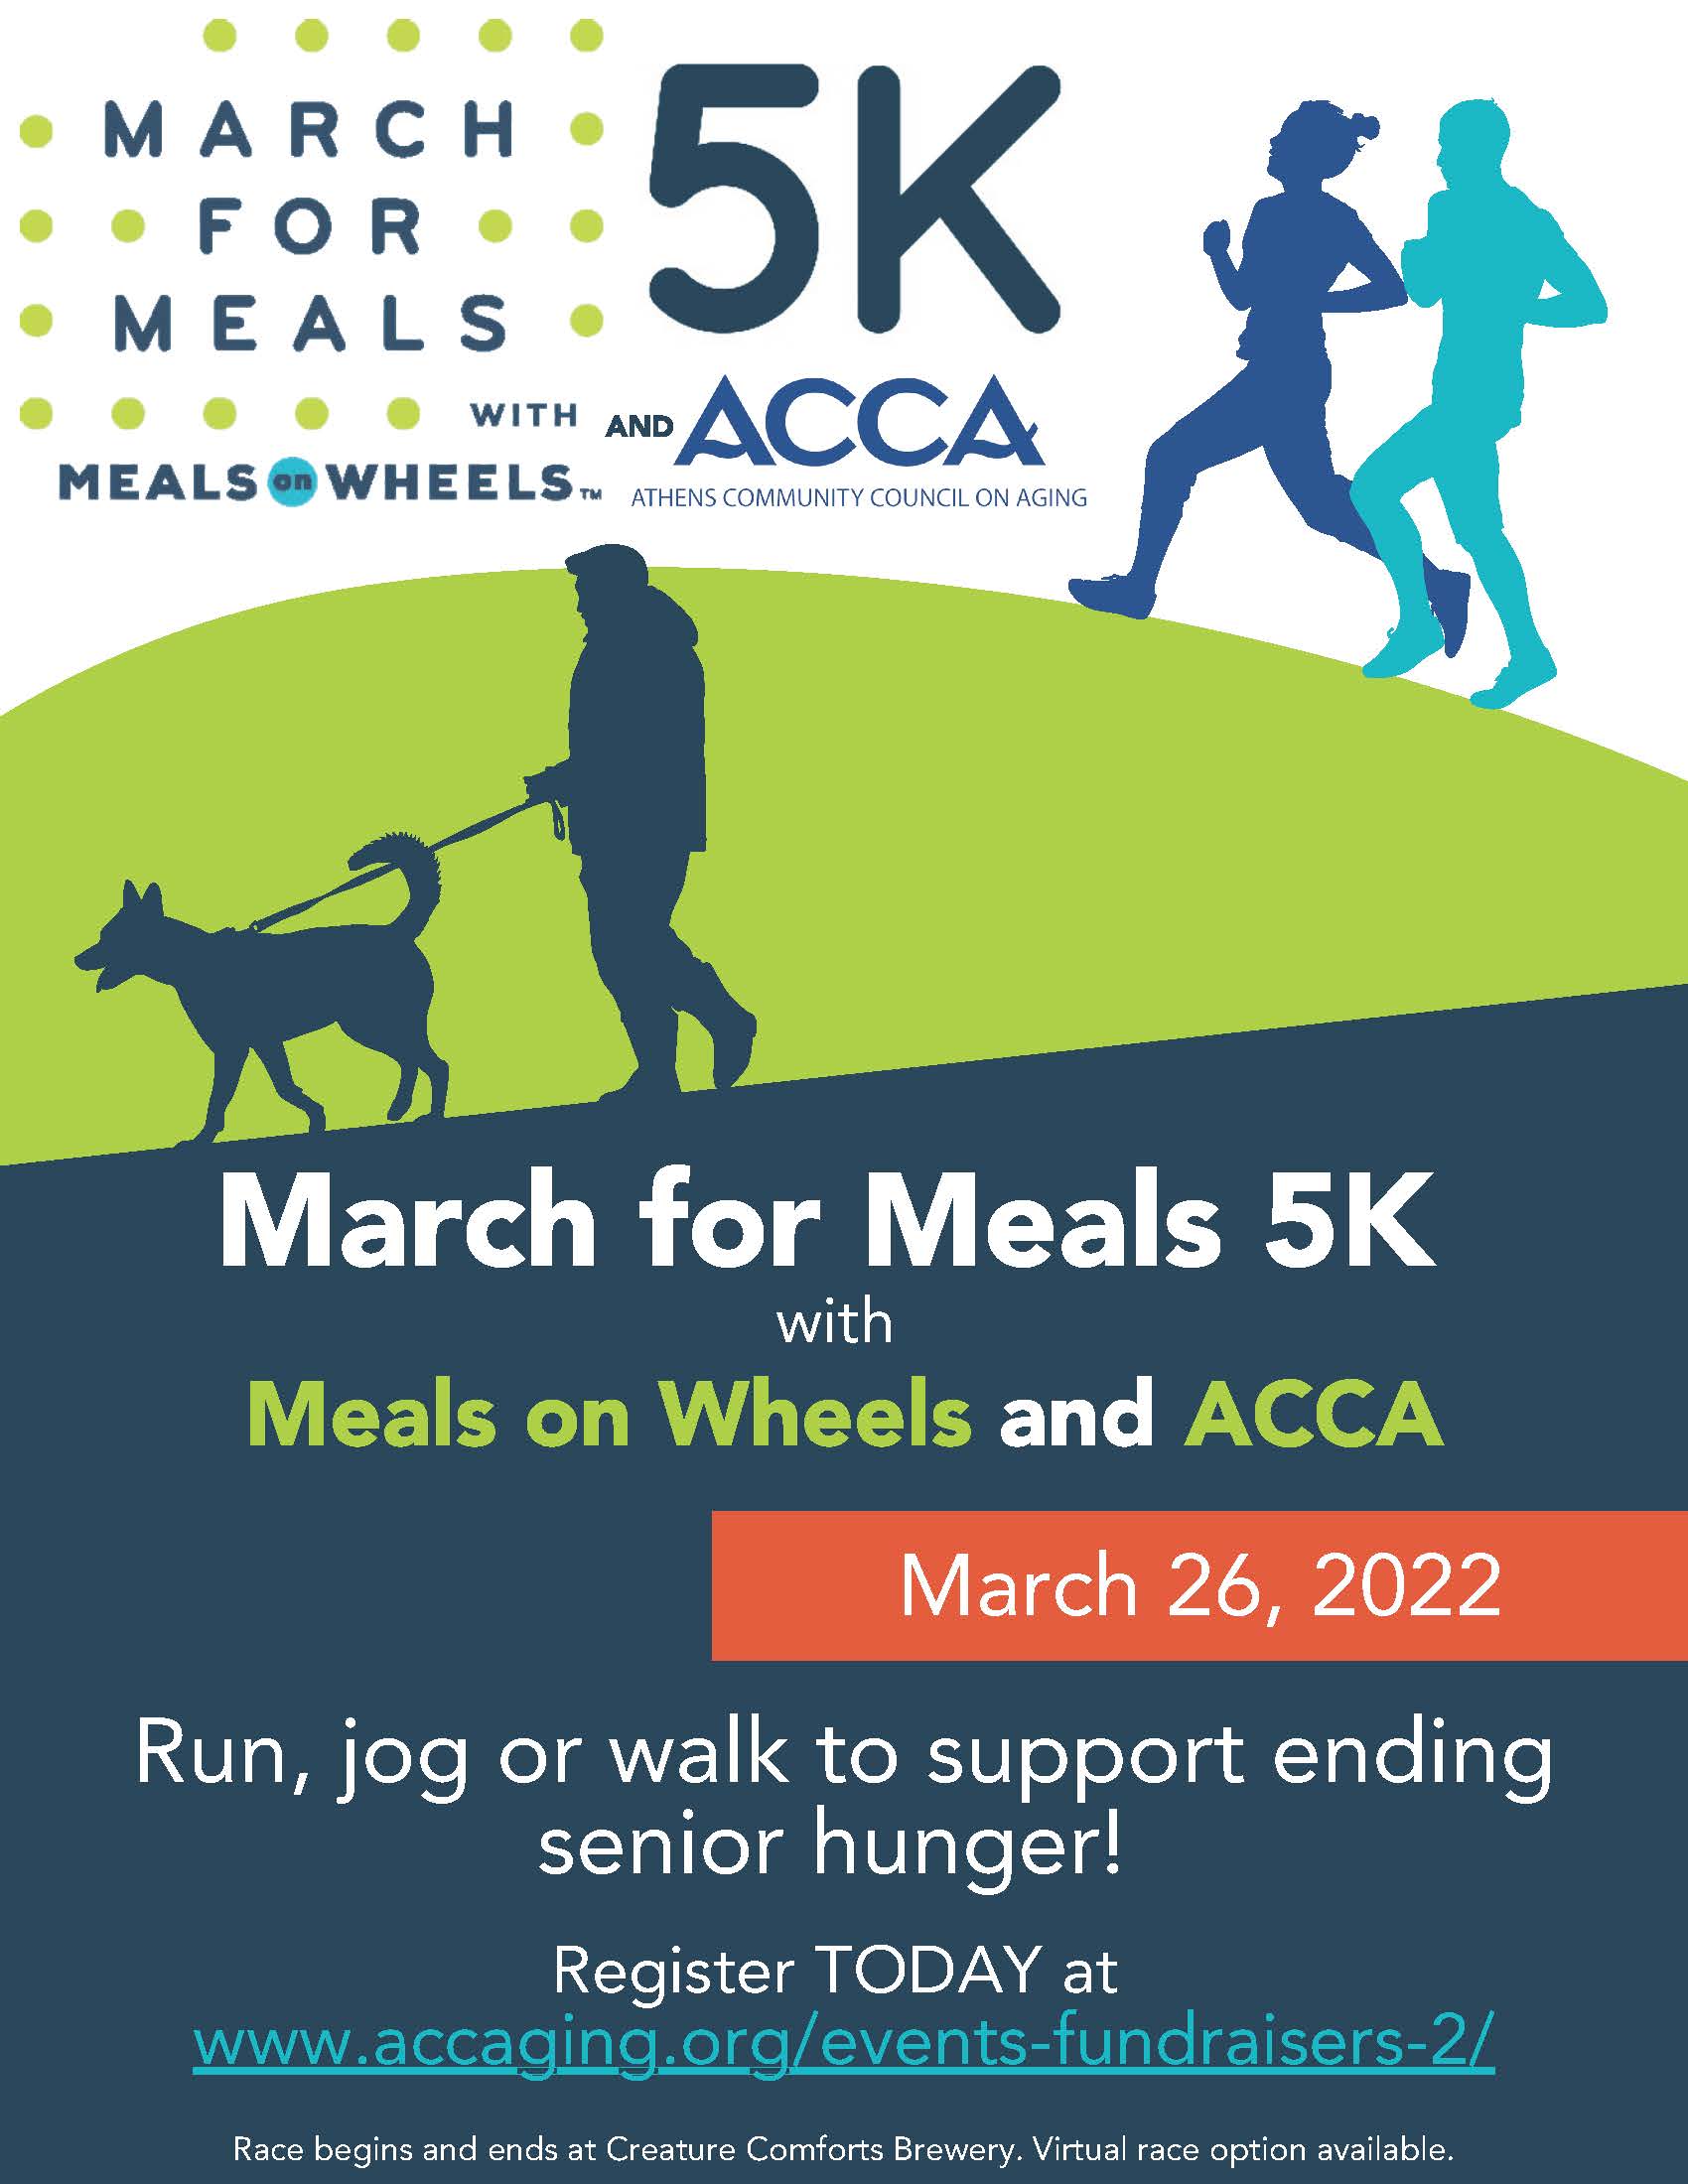 Registration now open for the 12th Annual March for Meals 5K!